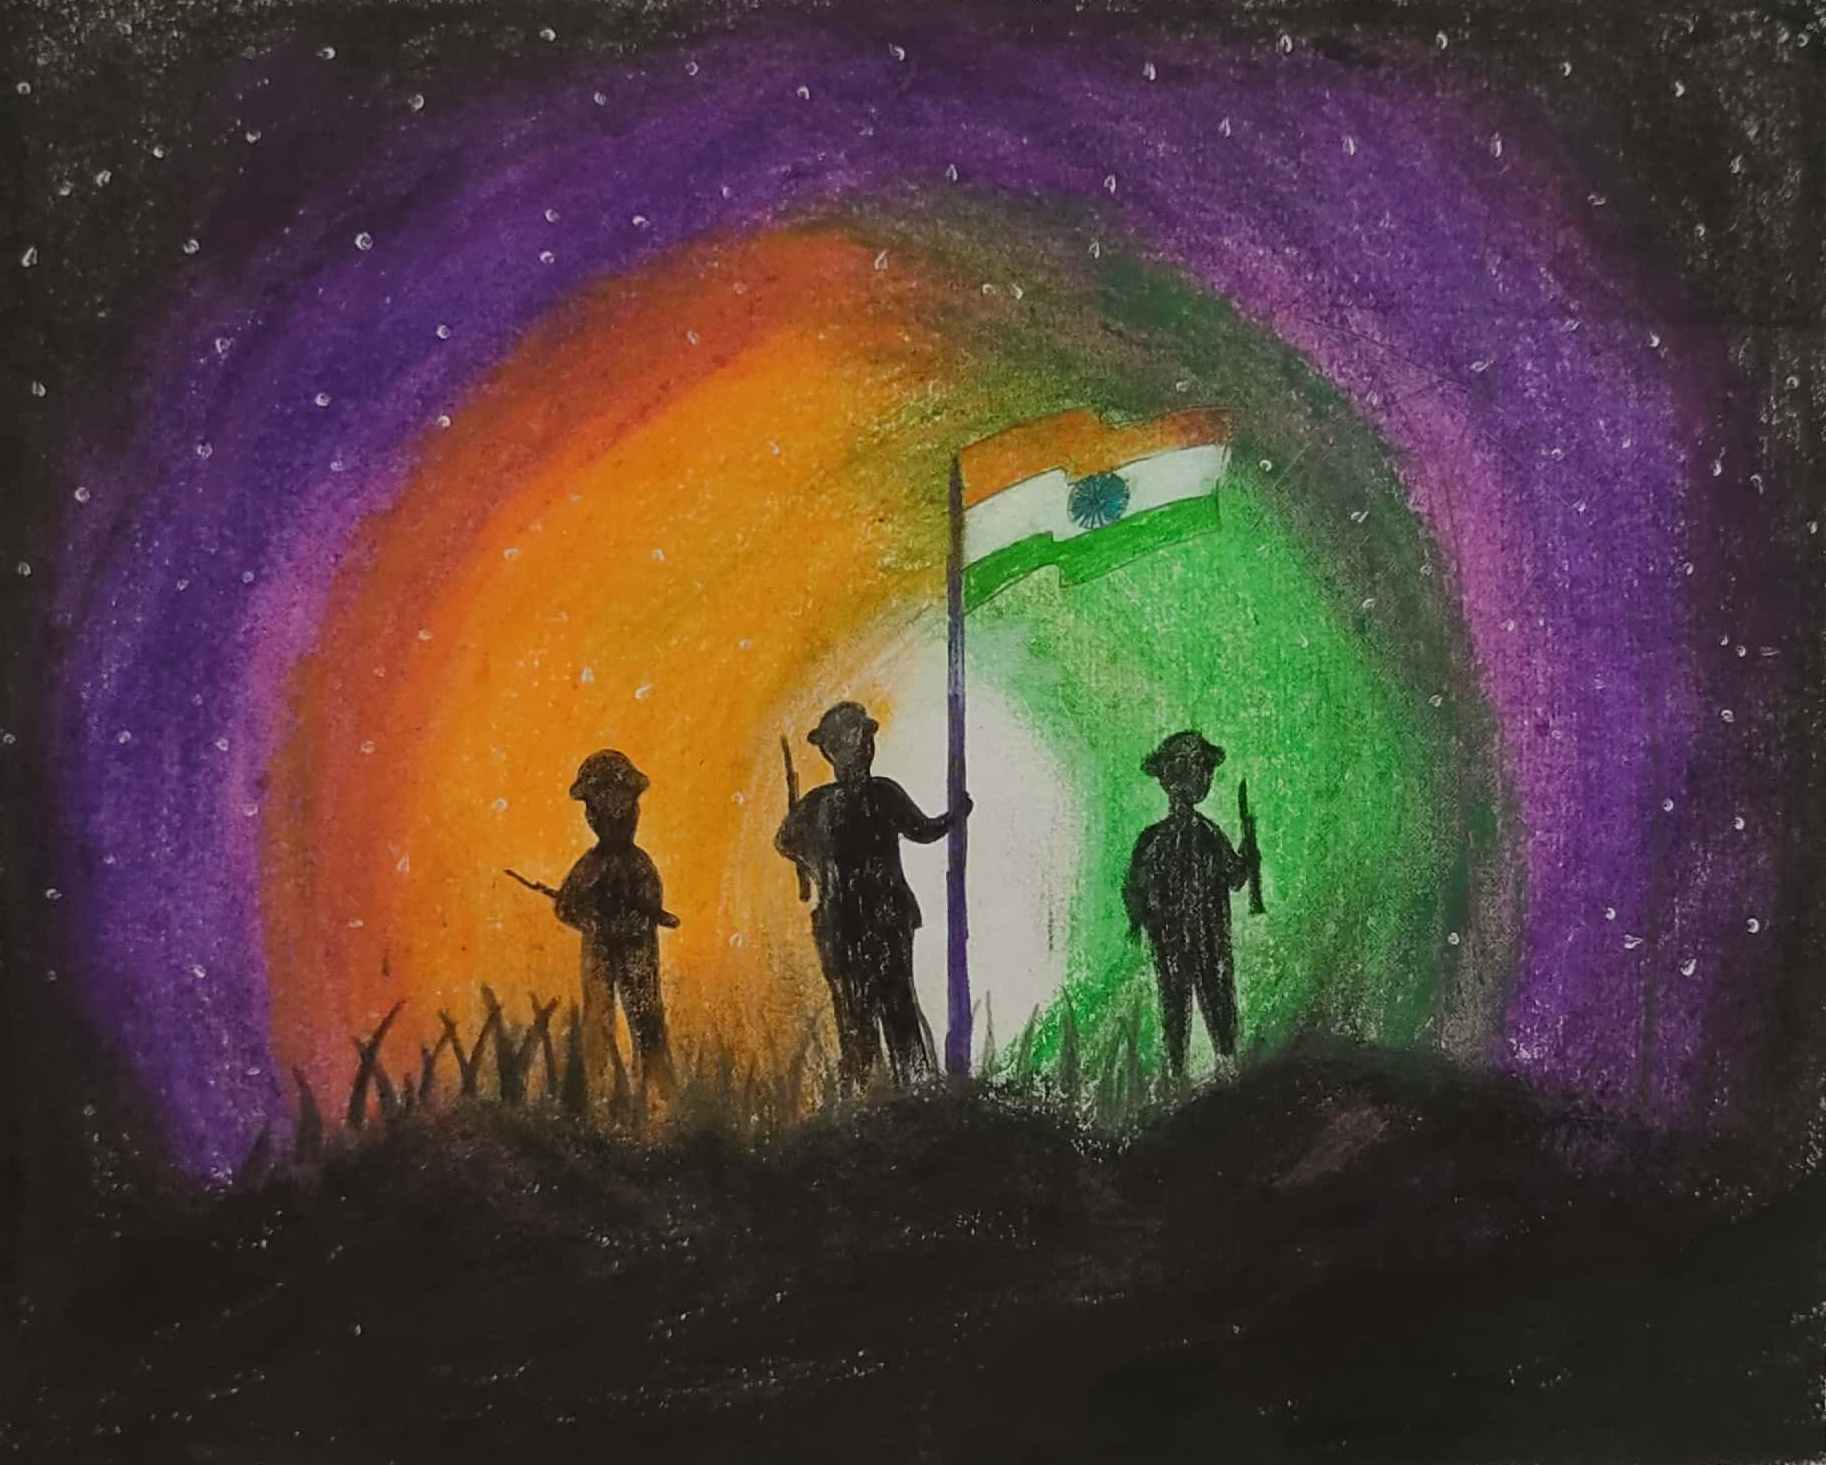 Chembur Mommies - Starring the CM Virtual Drawing Competition #VidhiJagesia  #7year #ChemburMommies #26thJan #RepublicDayCelebration #DrawingCompitition  #Patriotism #JaiHind #IndiaOfMyDreams | Facebook